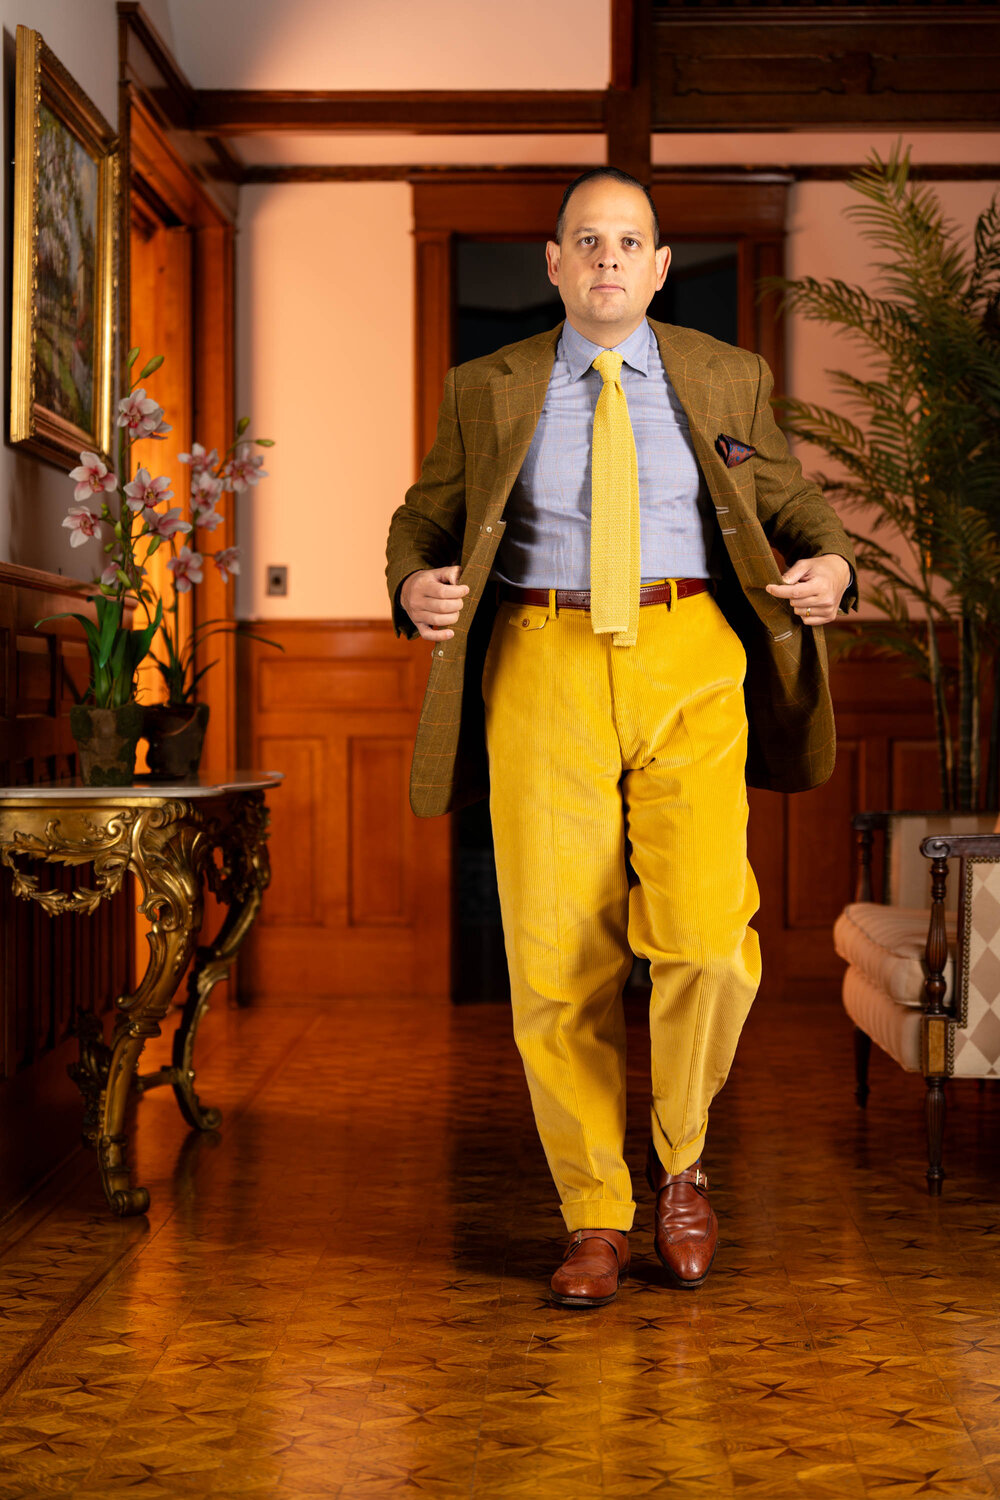 Raphael in Goldenrod Yellow Corduroy Trousers - Stancliffe